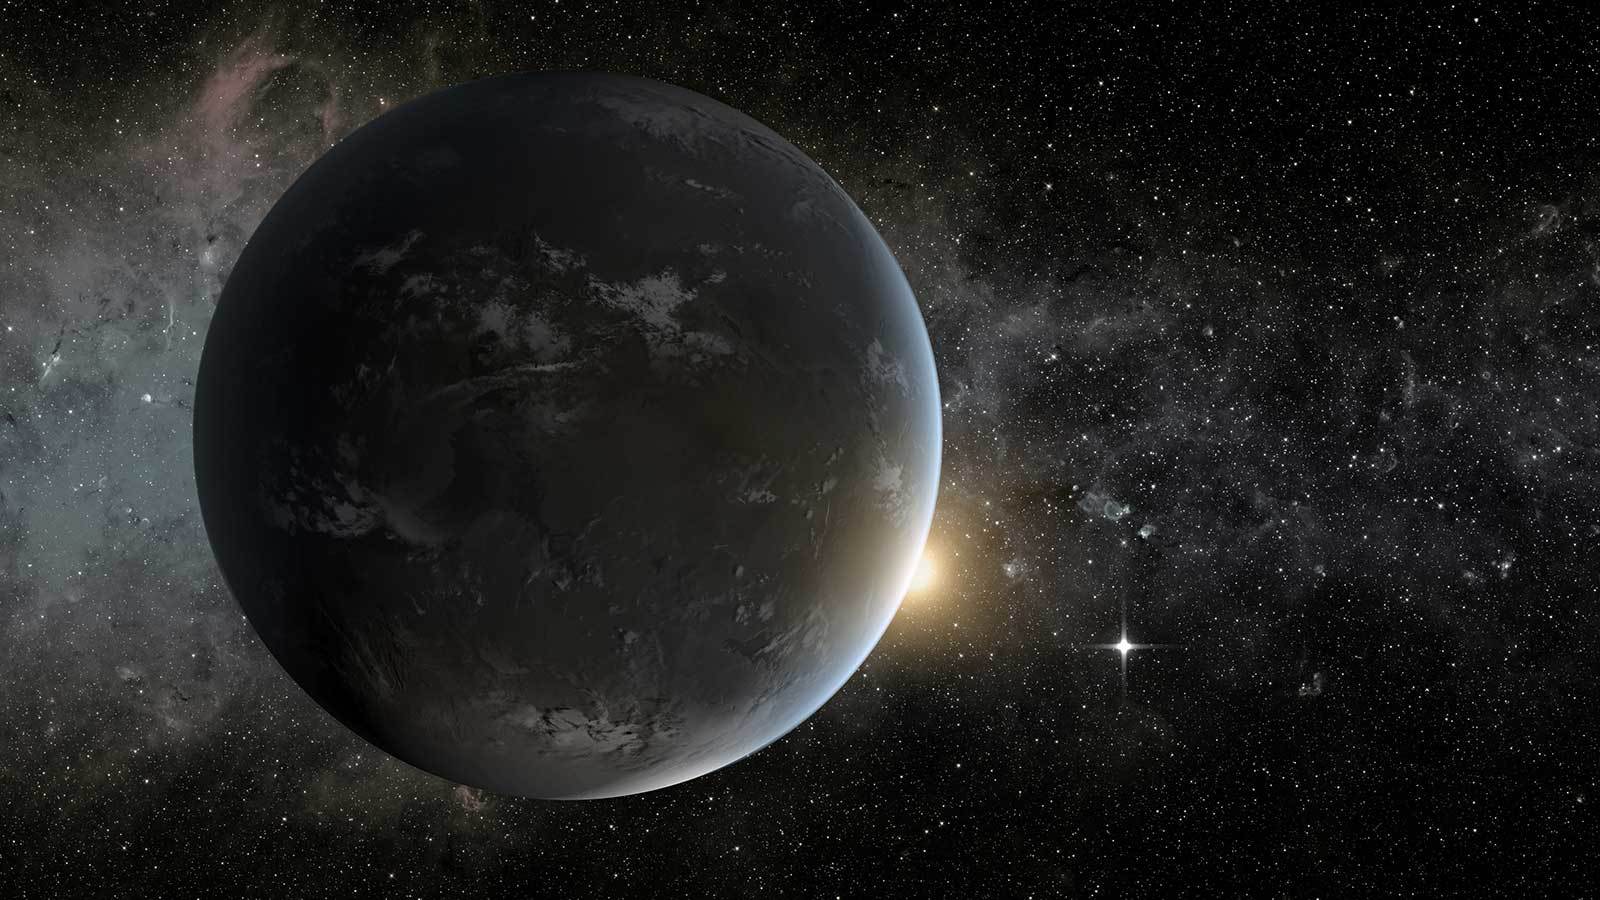 An artist's illustration of an exoplanet in the Goldilocks Zone.